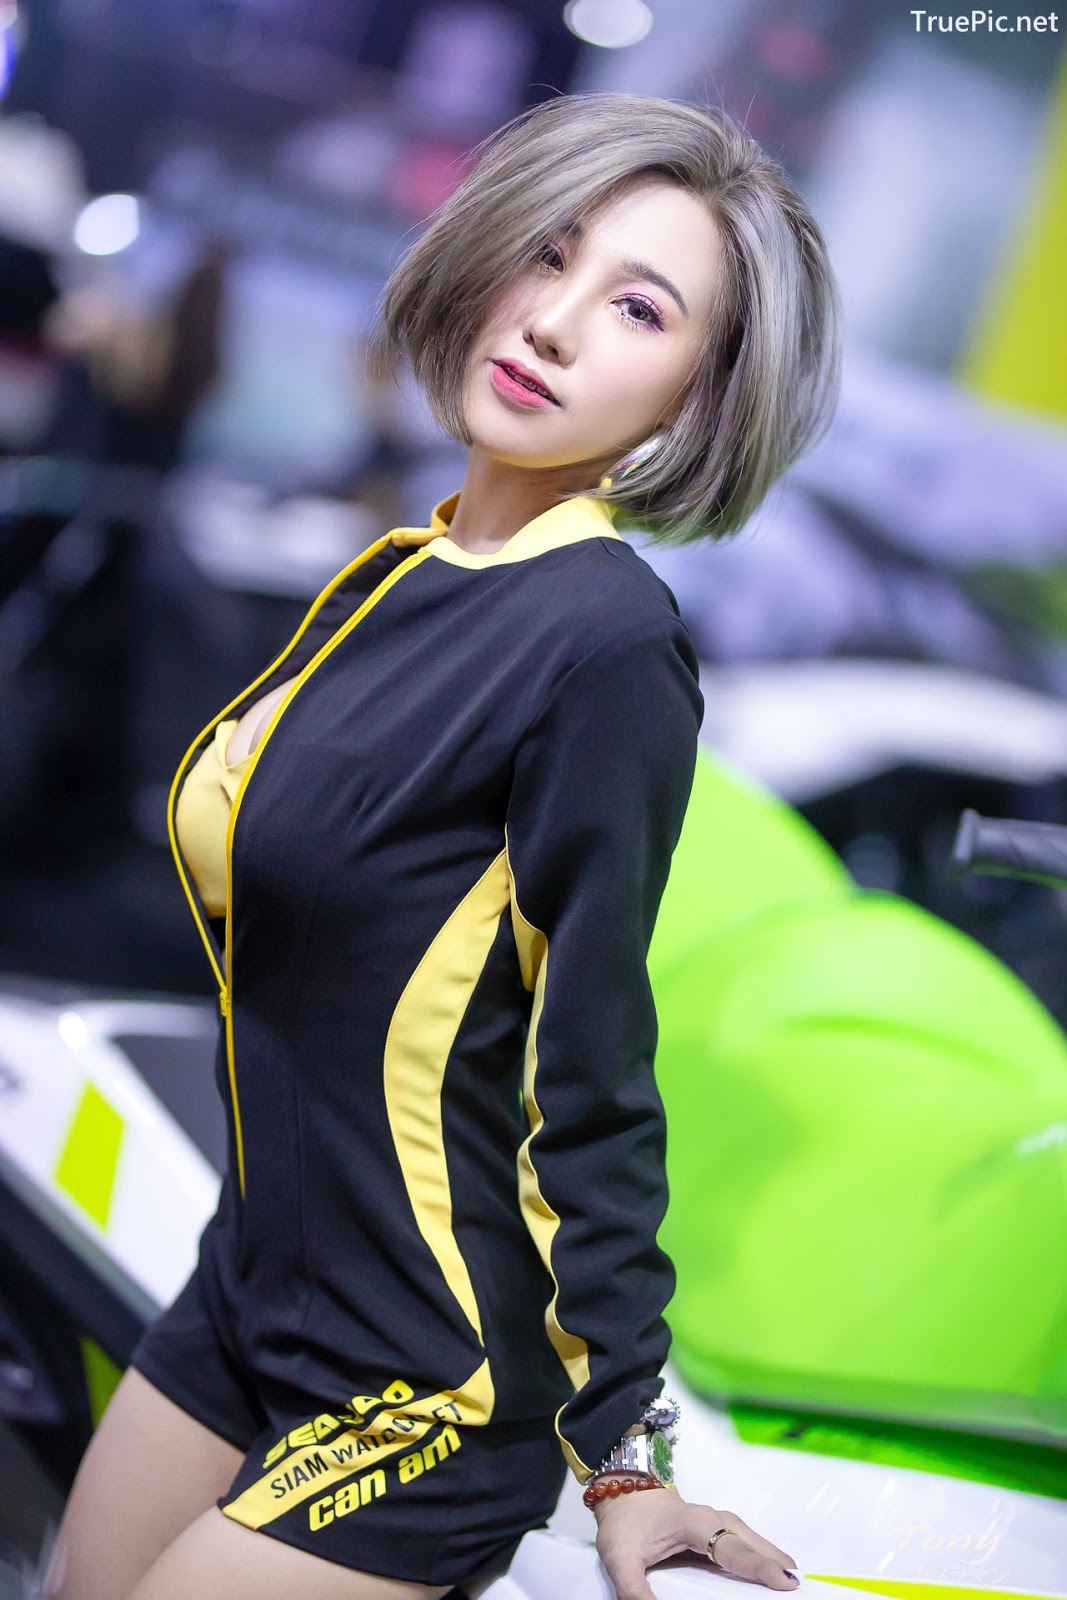 Image-Thailand-Hot-Model-Thai-Racing-Girl-At-Motor-Show-2019-TruePic.net- Picture-22